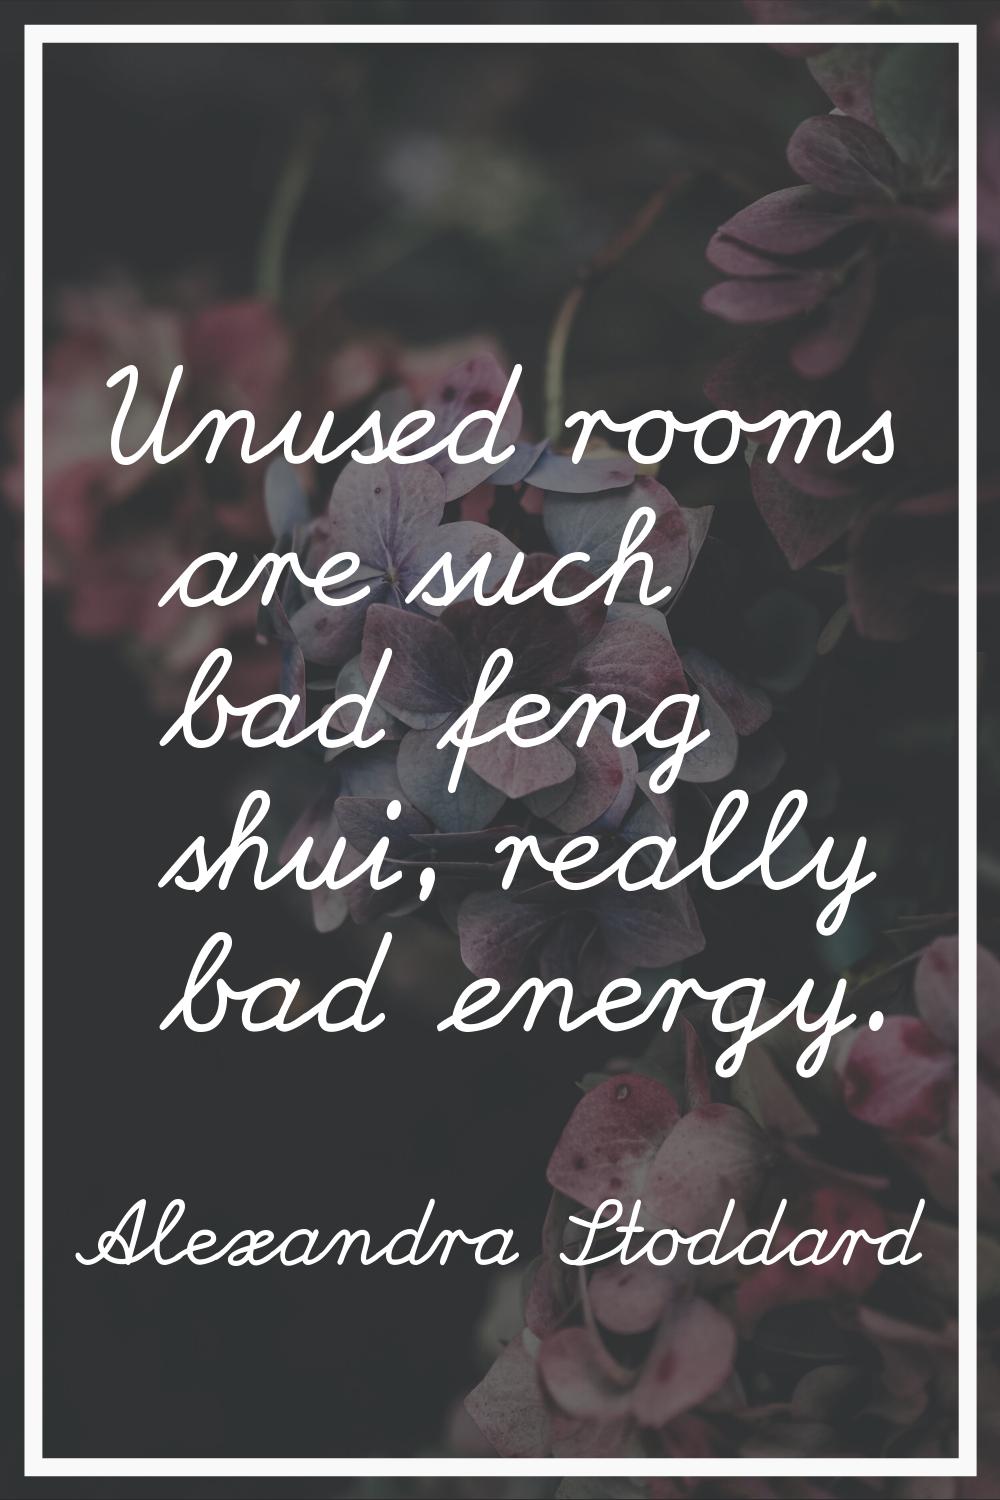 Unused rooms are such bad feng shui, really bad energy.